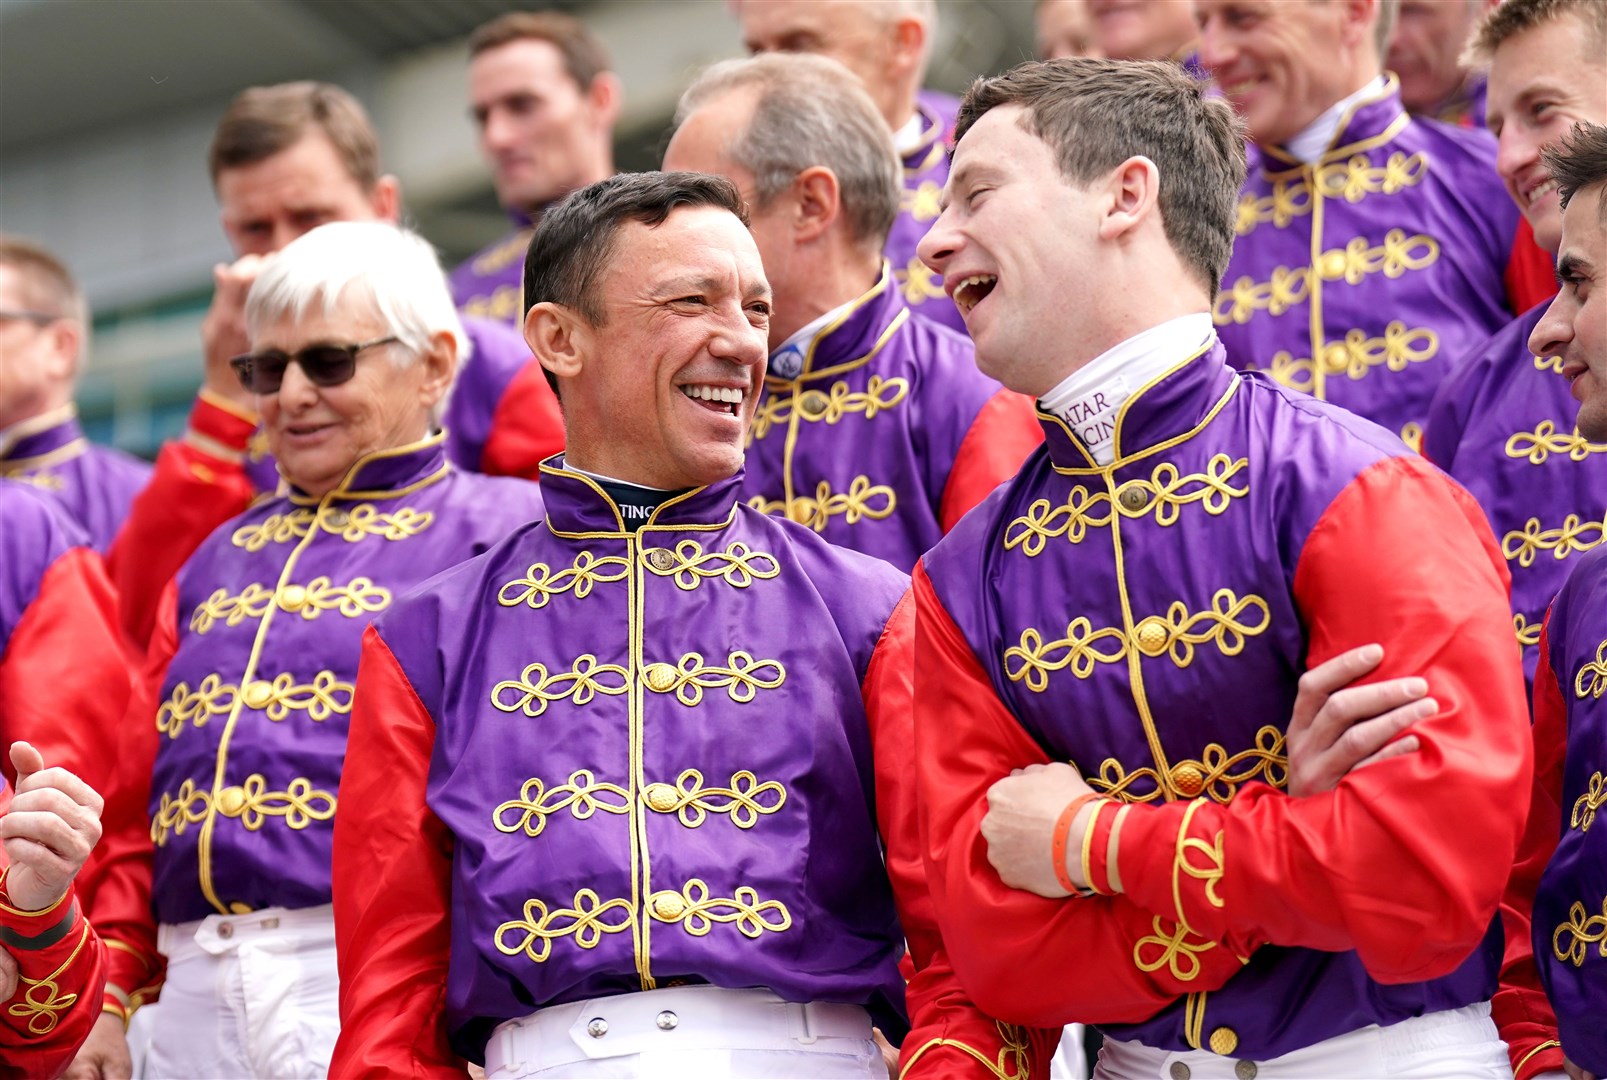 Frankie Dettori (left) and Oisin Murphy with other jockeys who have ridden horses for the Queen in the past on Derby Day at Epsom (PA)